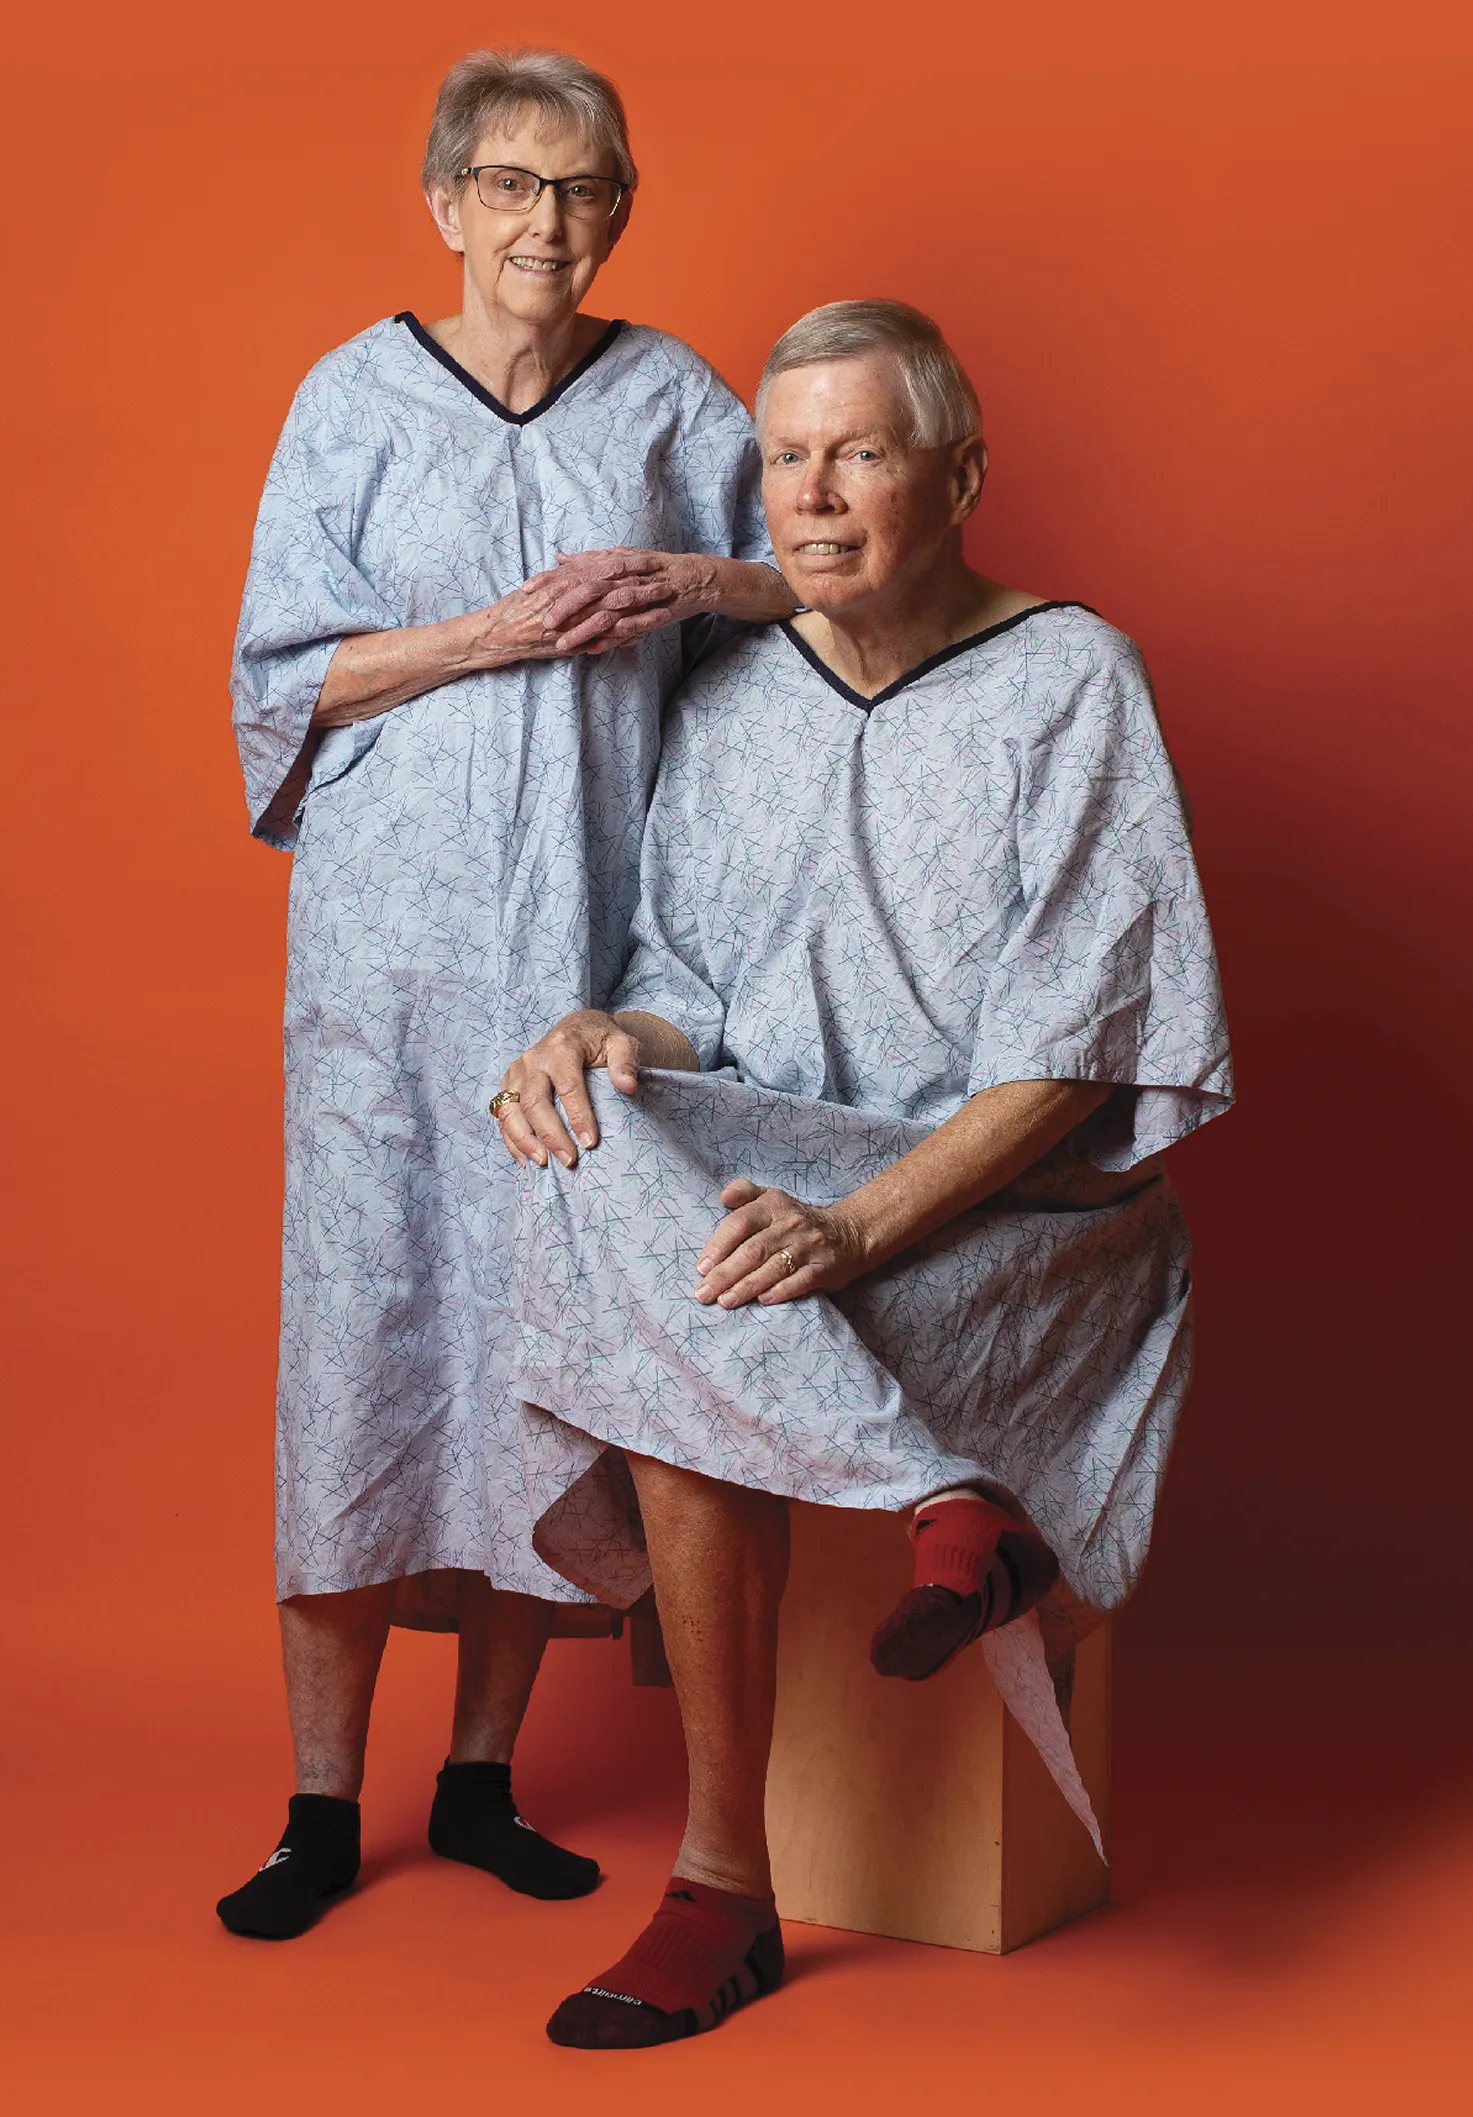 Two older participant patients posing together on an orange background